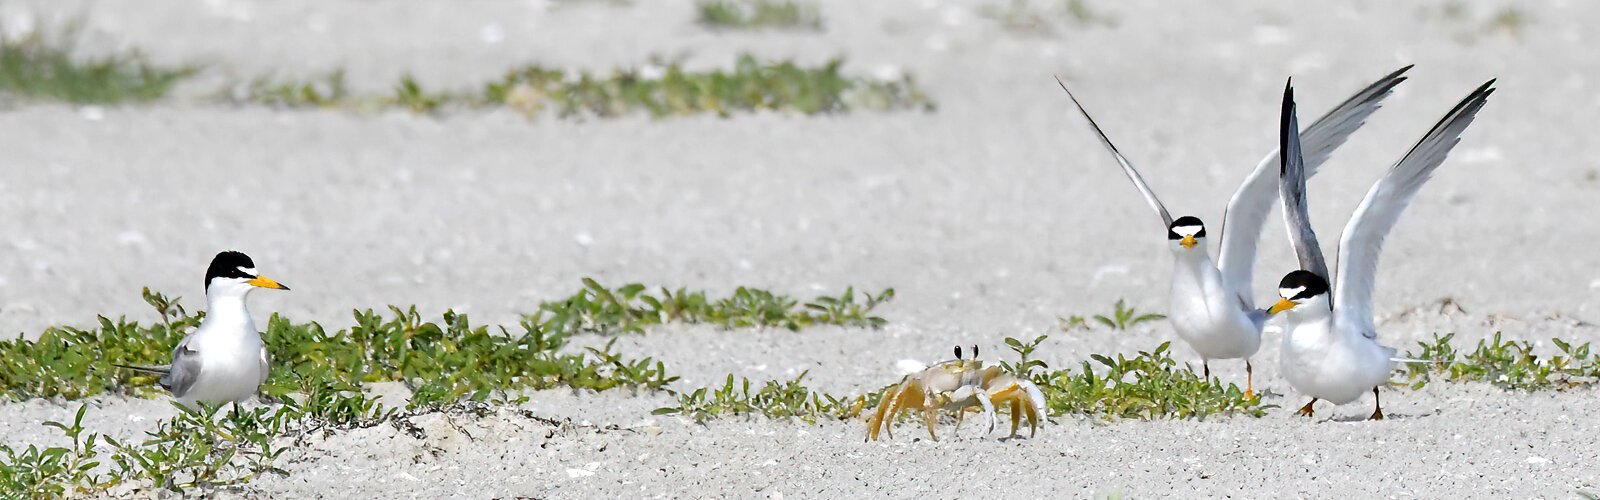 These least terns are trying to scare off a ghost crab, a serious predator of their eggs and chicks. A state-threatened species, they are the smallest of the terns. Due to loss of habitat, many have now resorted to nesting on gravel rooftops.